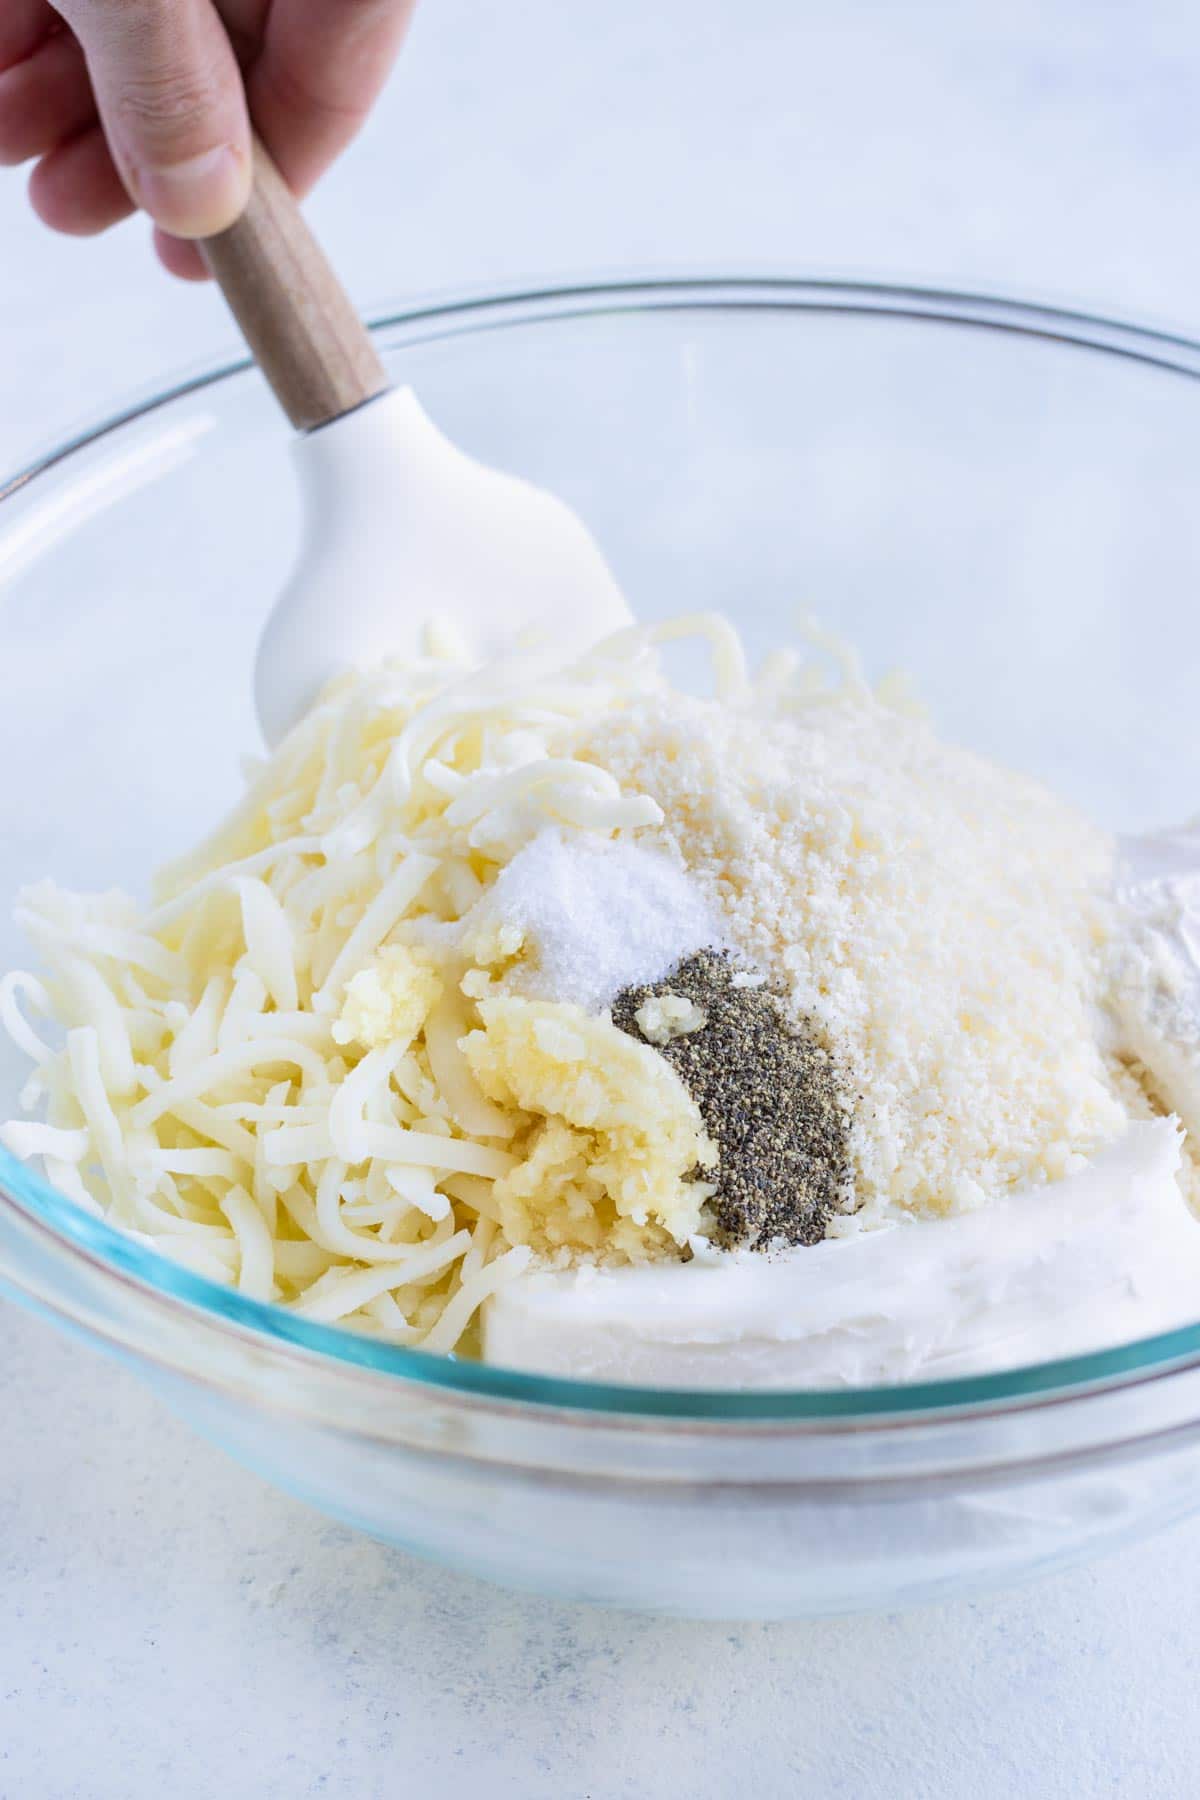 Cream cheese, mozzarella, parmesan, sour cream, and seasonings are mixed together.